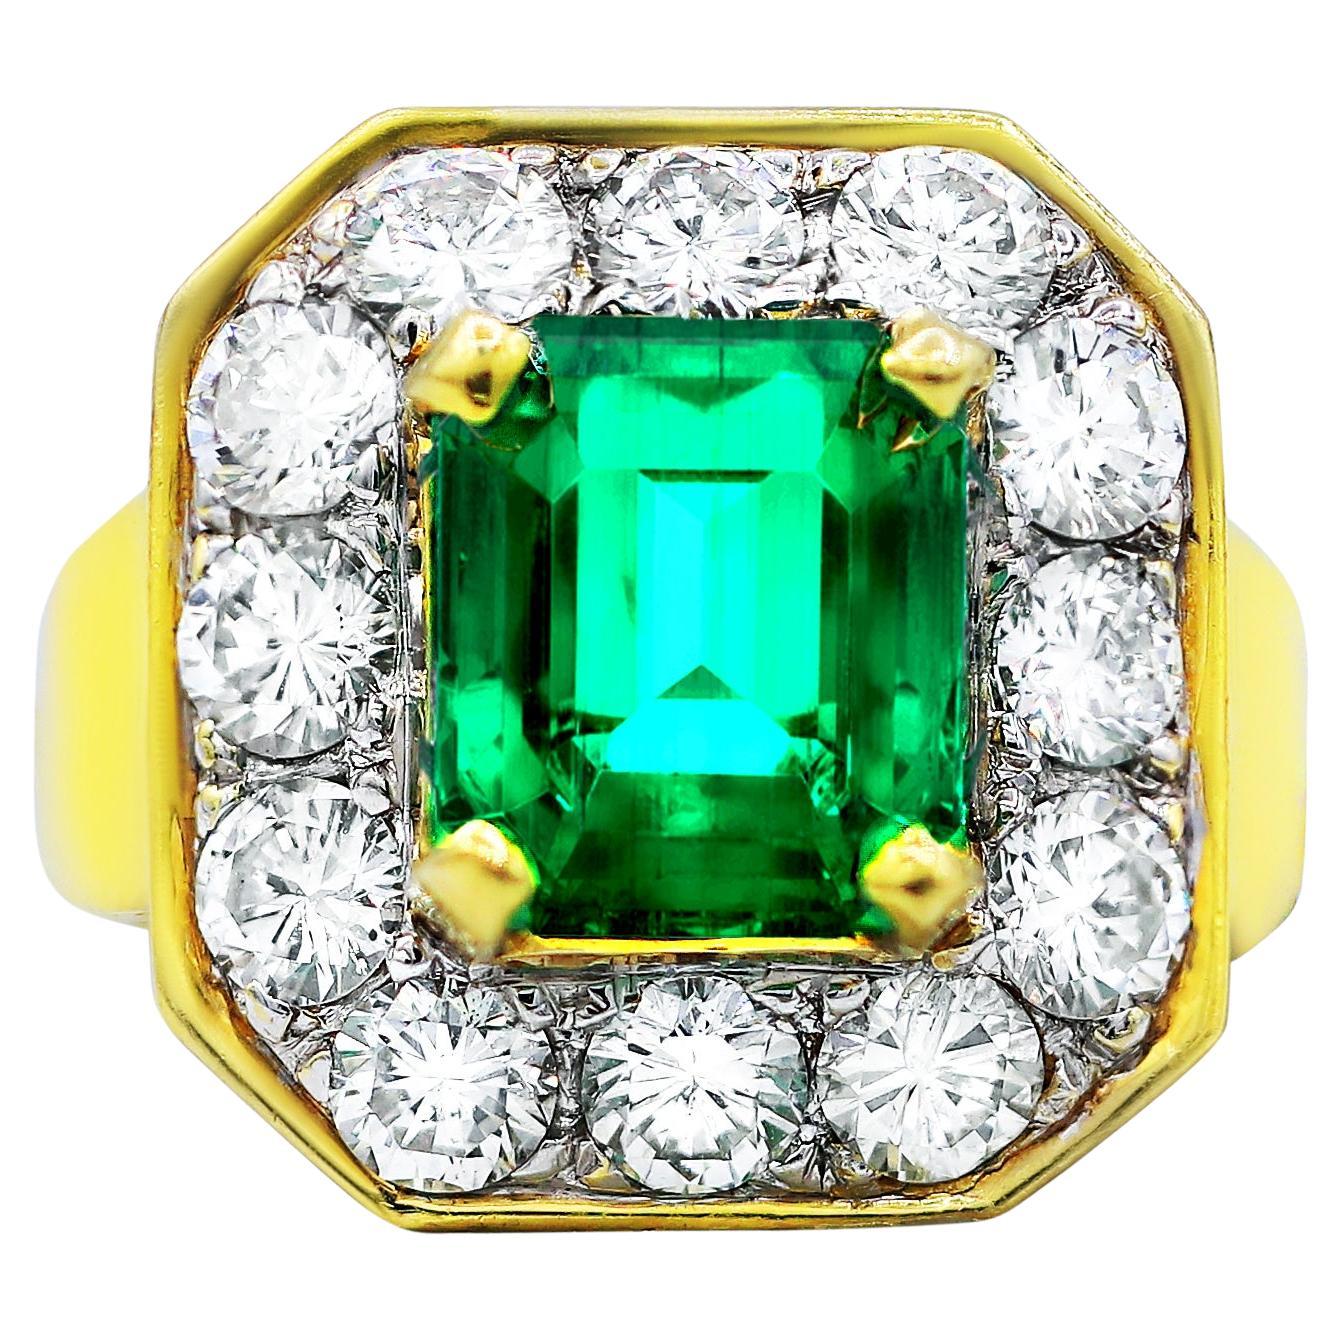 Diana M. 18 kt yellow gold emerald and diamond ring featuring a center 3.70 ct 